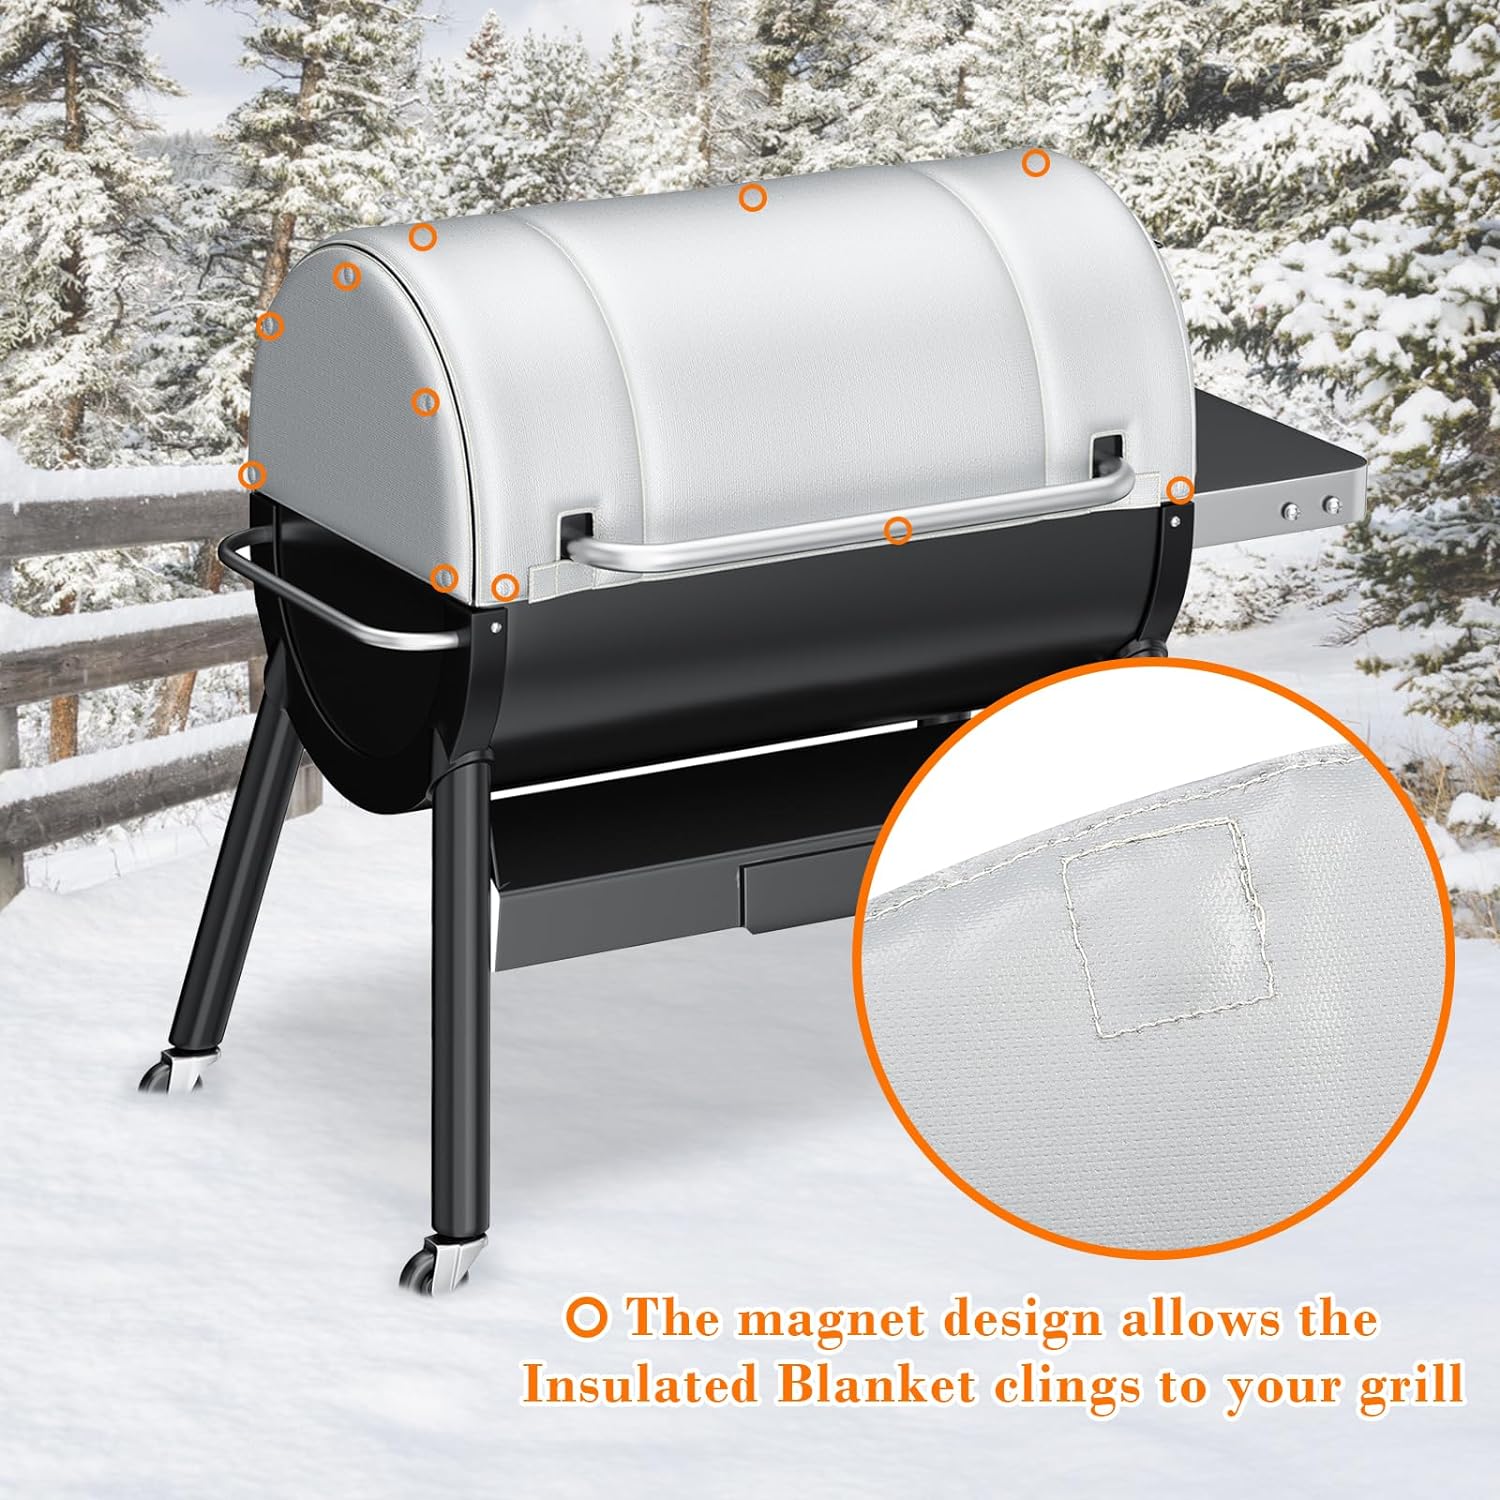 36 inch Grill Thermal Insulated Blanket for Weber SmokeFire EX6 Wood Fired Pellet Smoker Grill Blanket Accessories for Cold Winter Cooking